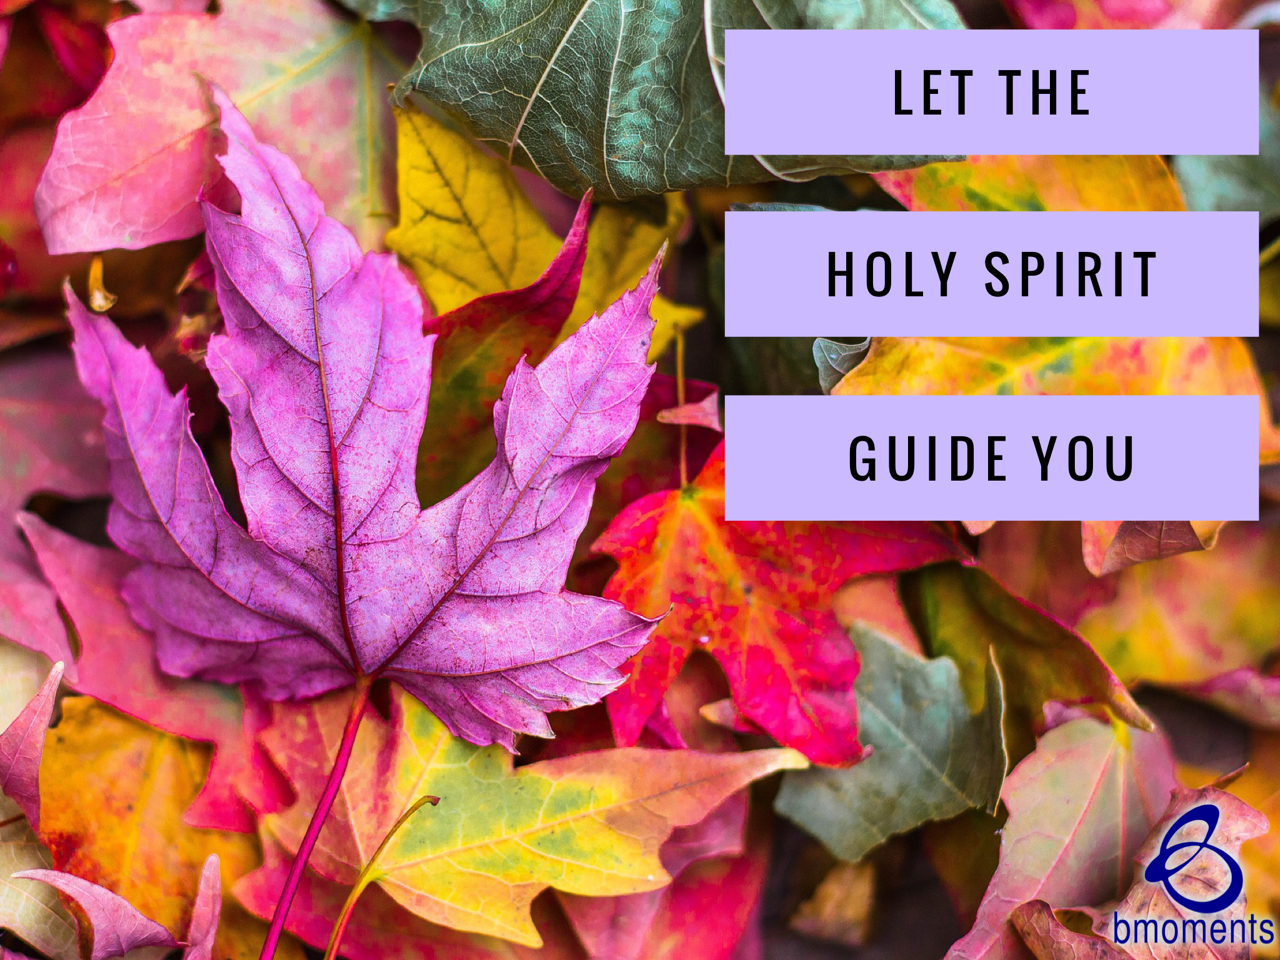 Prepare for a New Season with the Holy Spirit